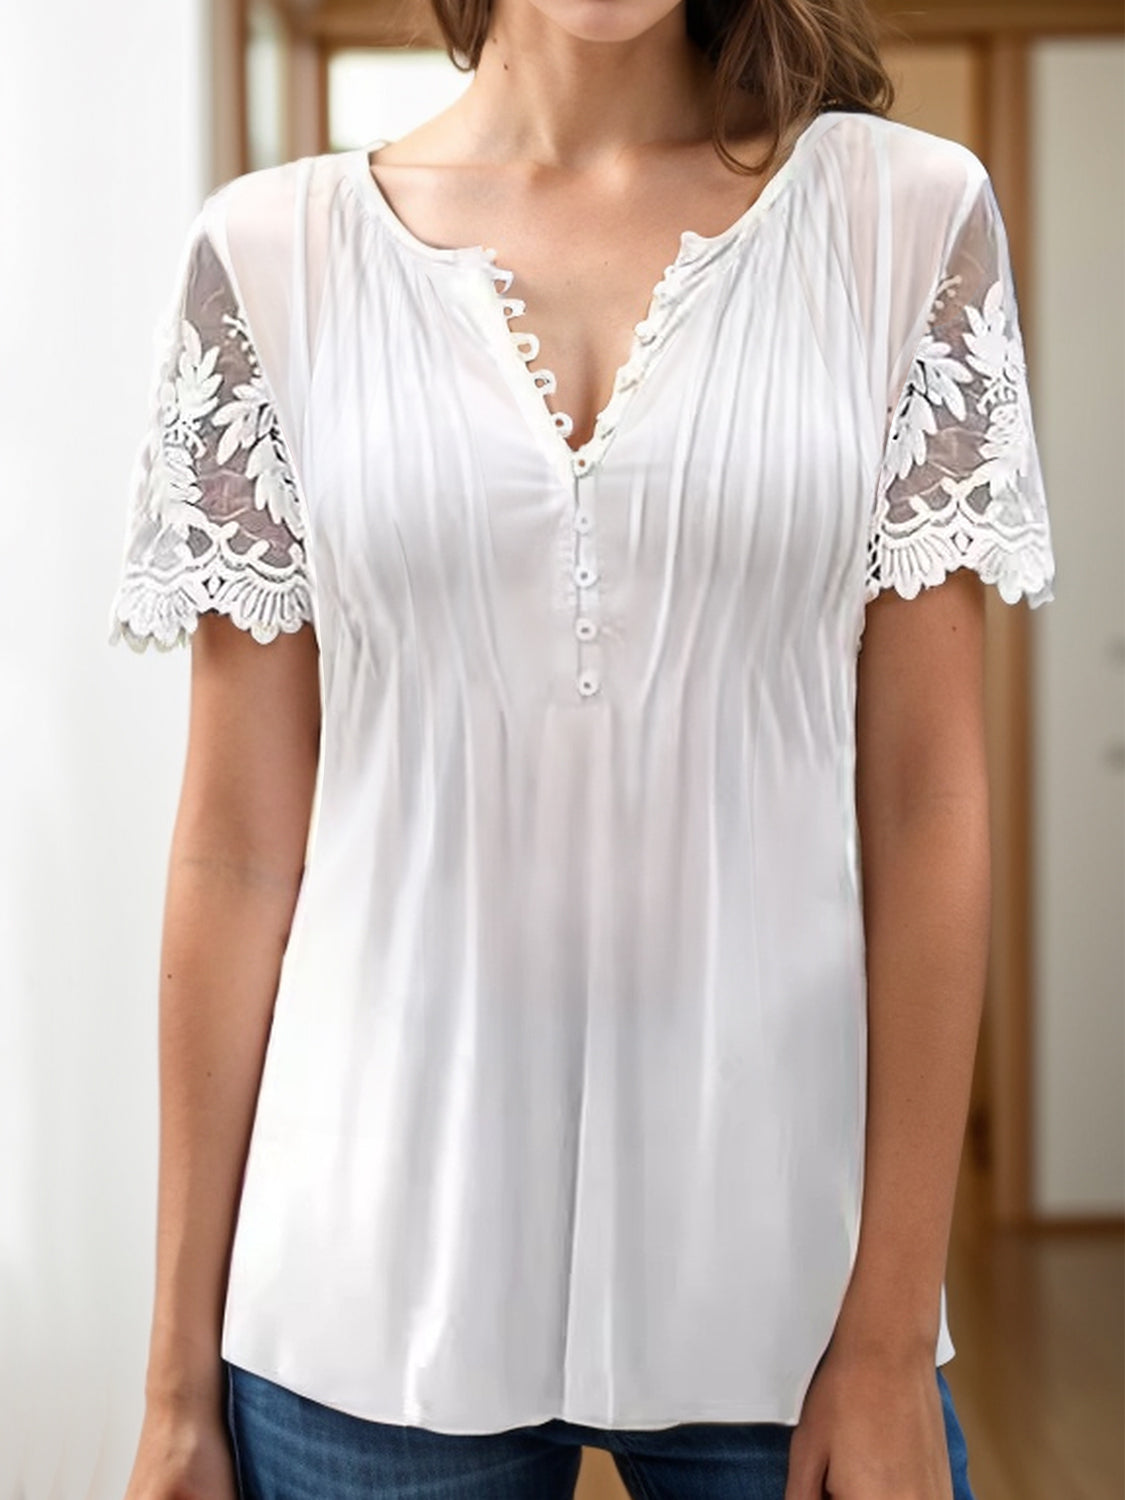 Notched Lace Short Sleeve Top